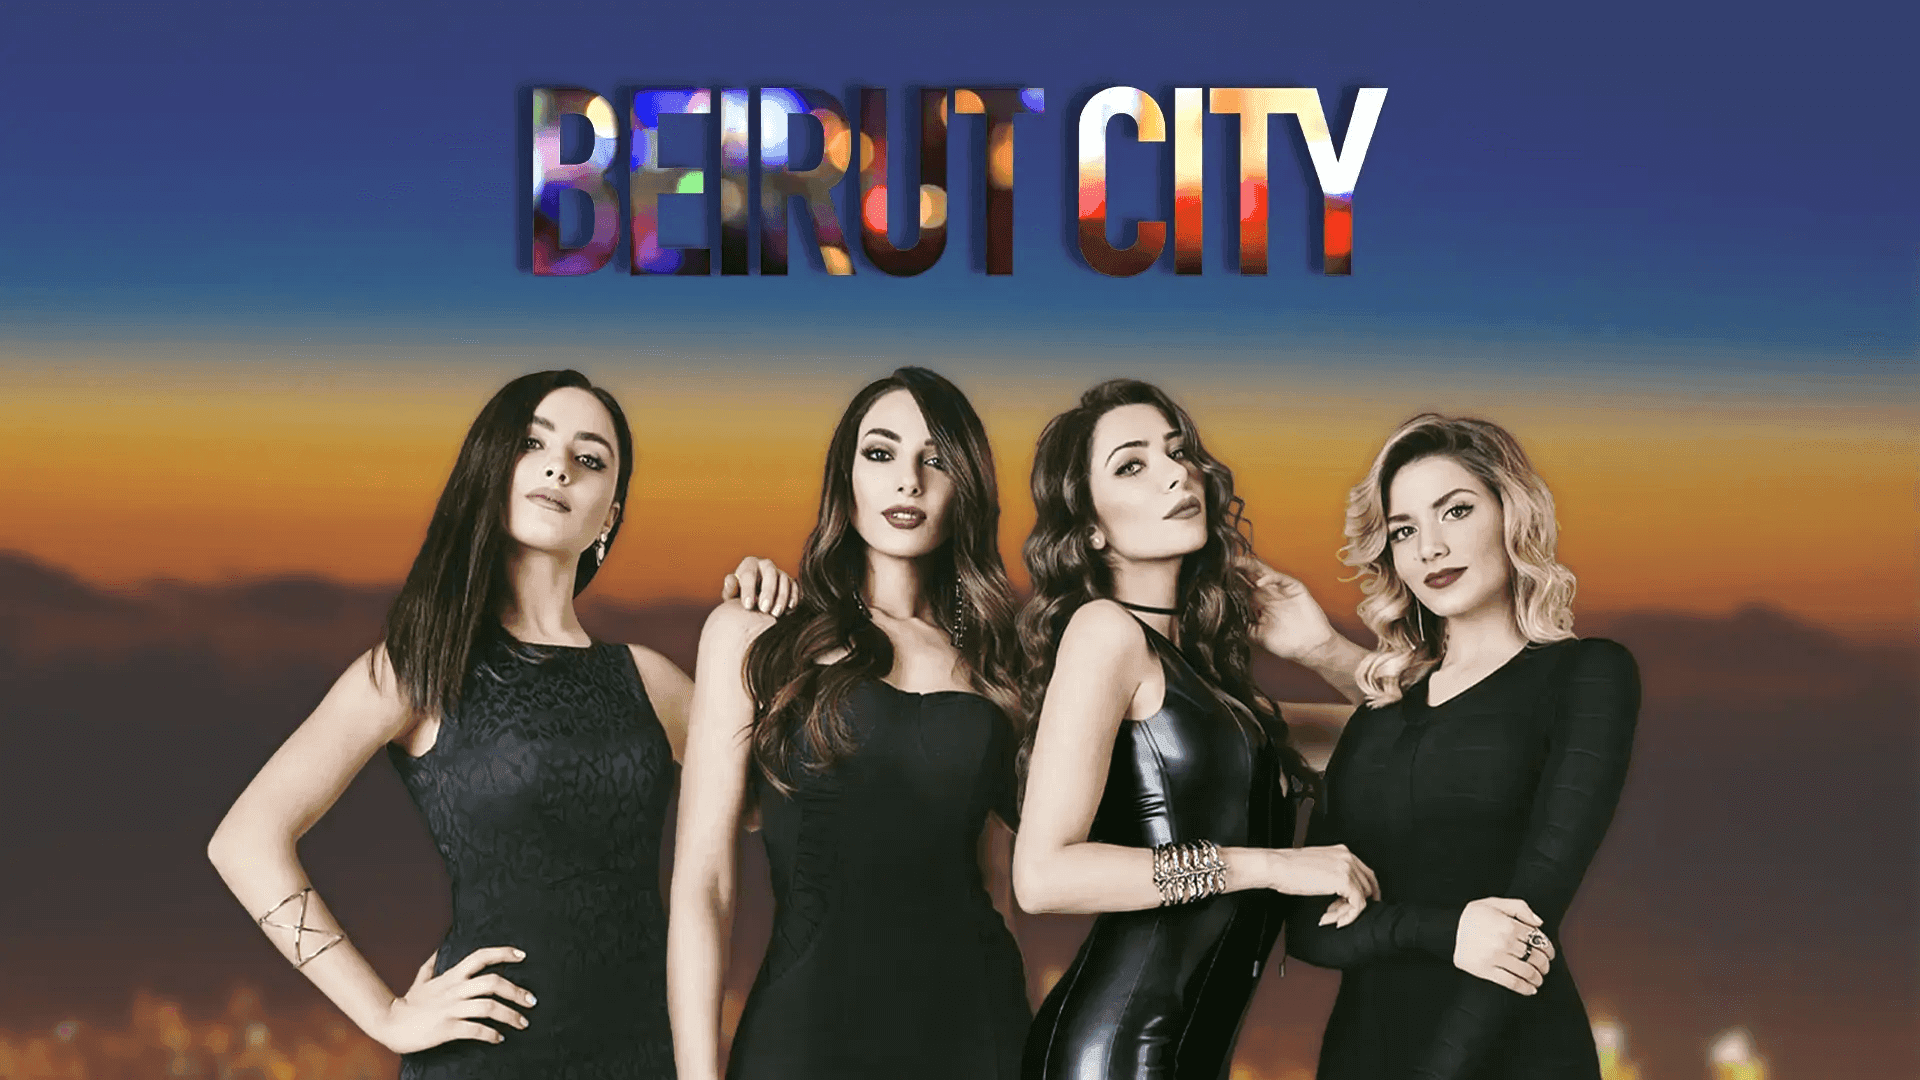 images/1_FastTV/Serials/Beirut City/BC 5.png